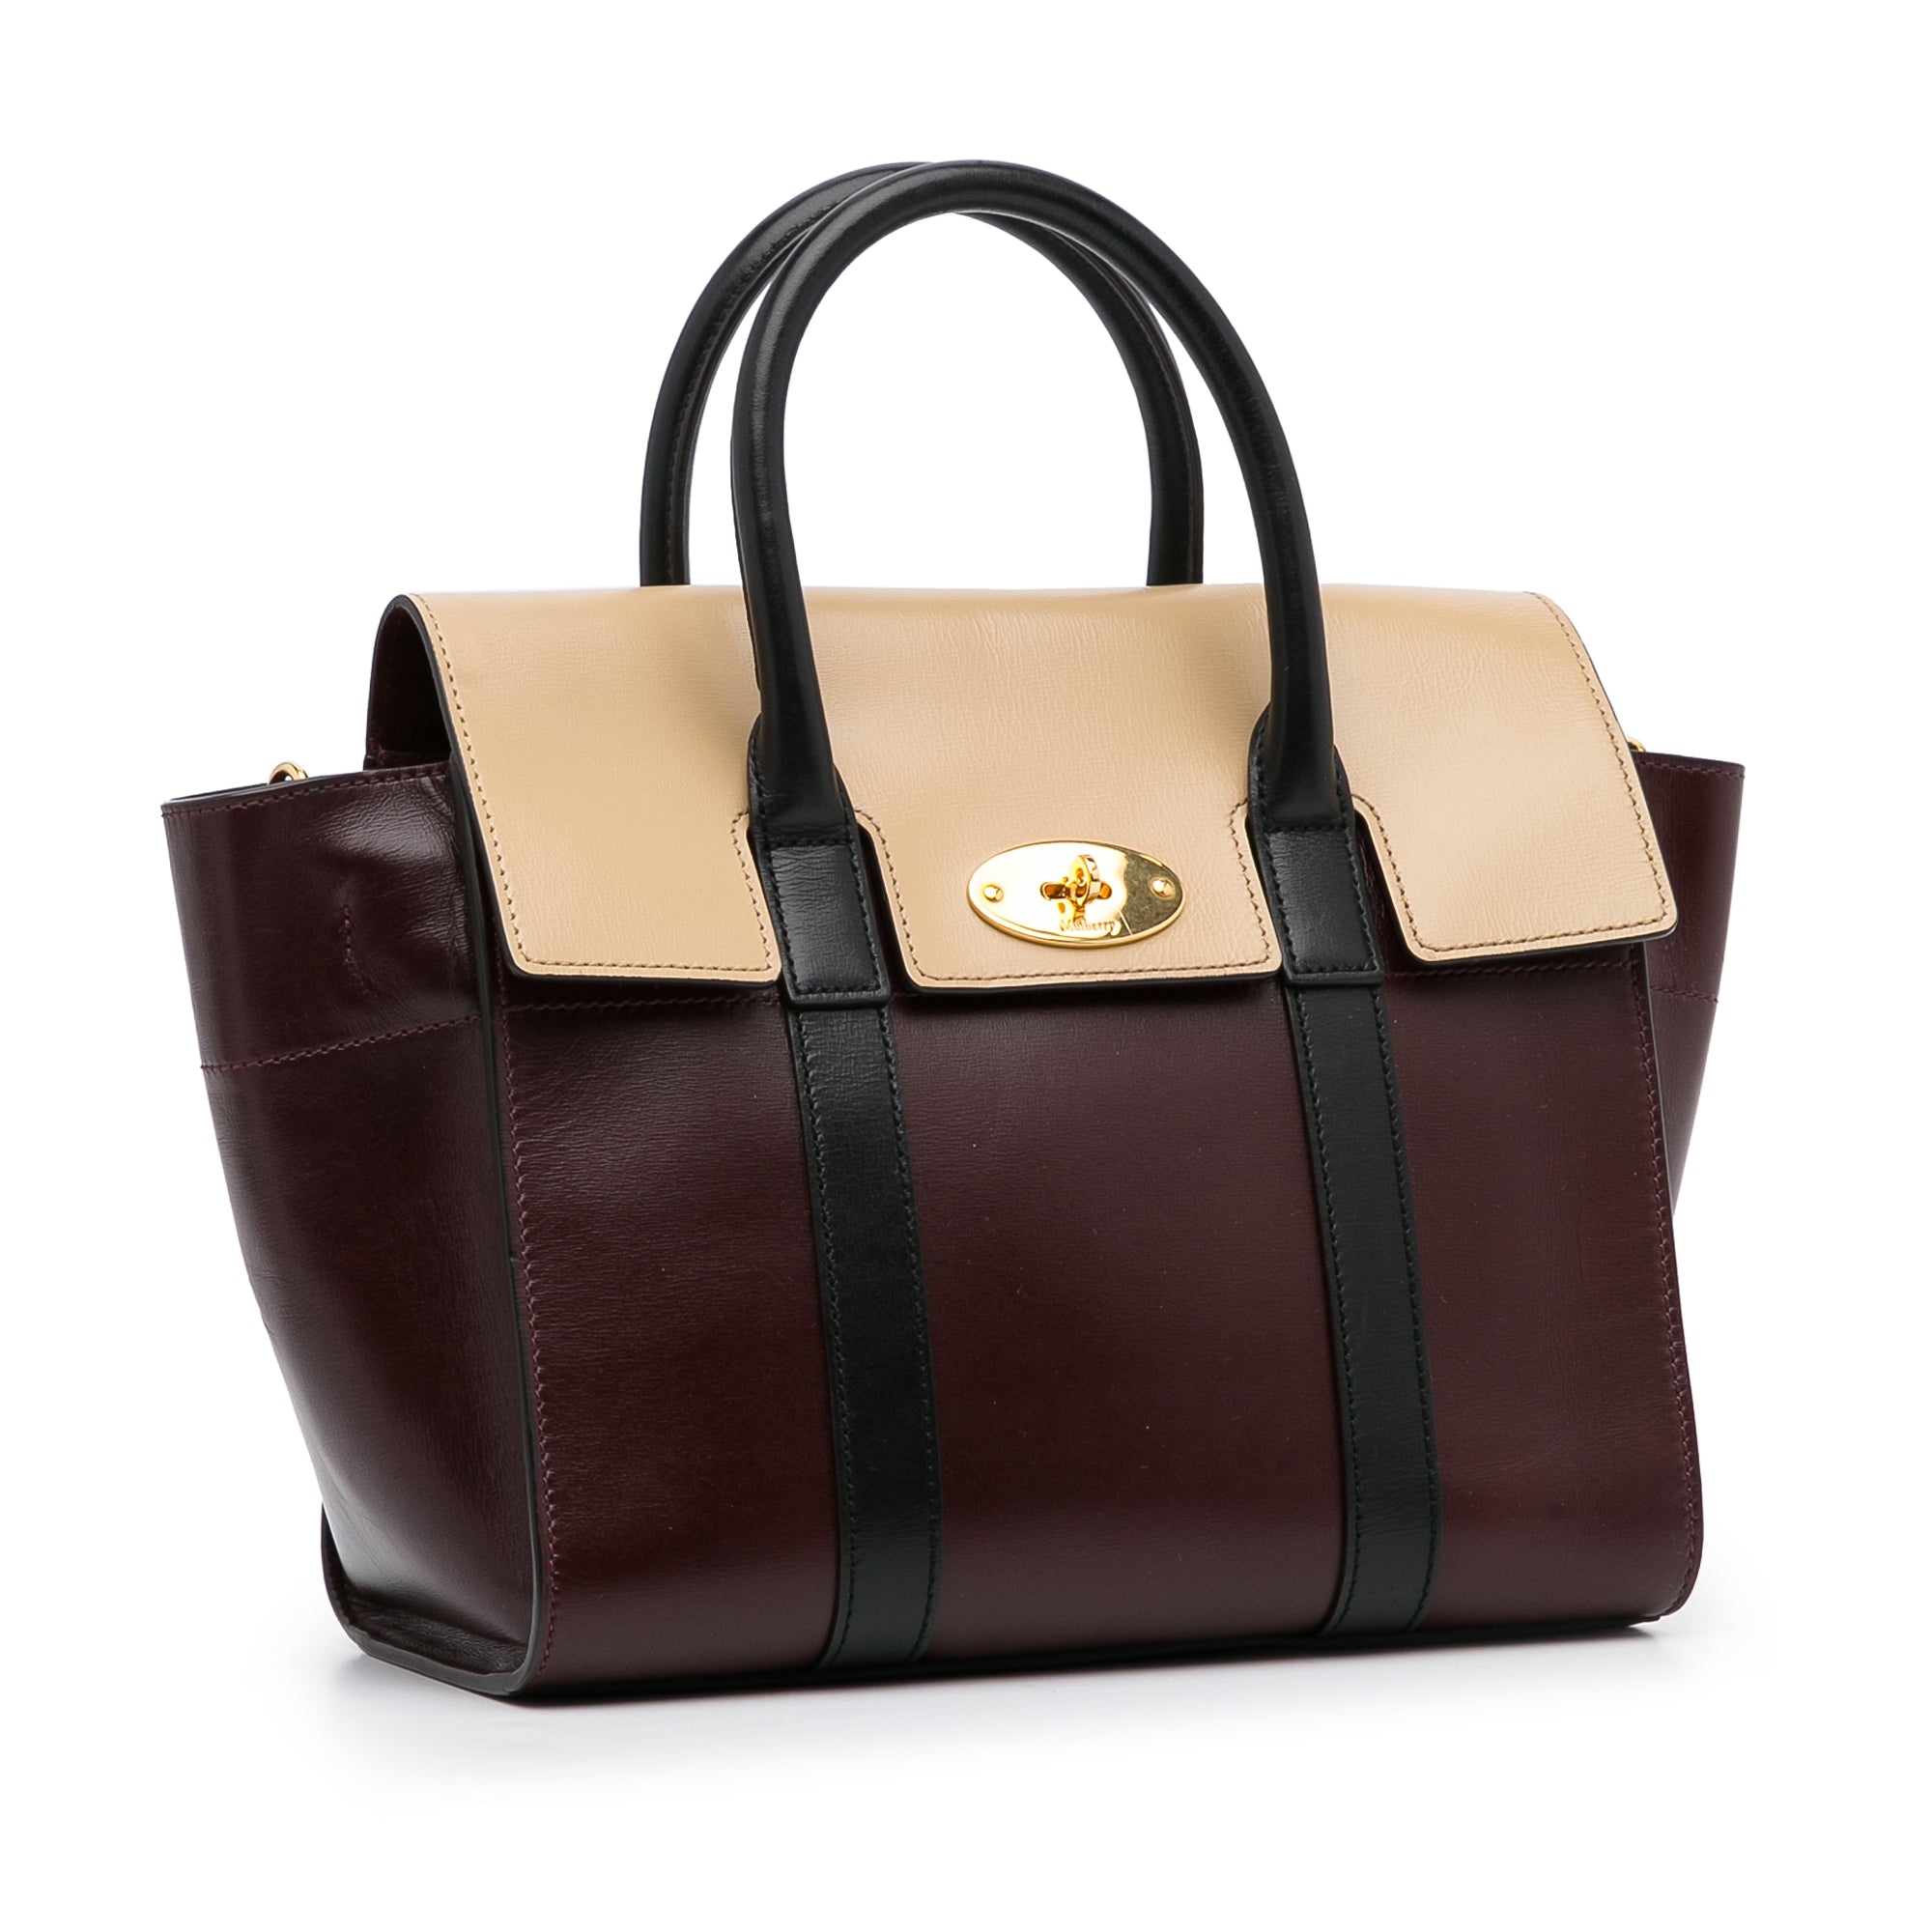 FIVE Reasons Why You Should Invest In The Mulberry Bayswater Bag